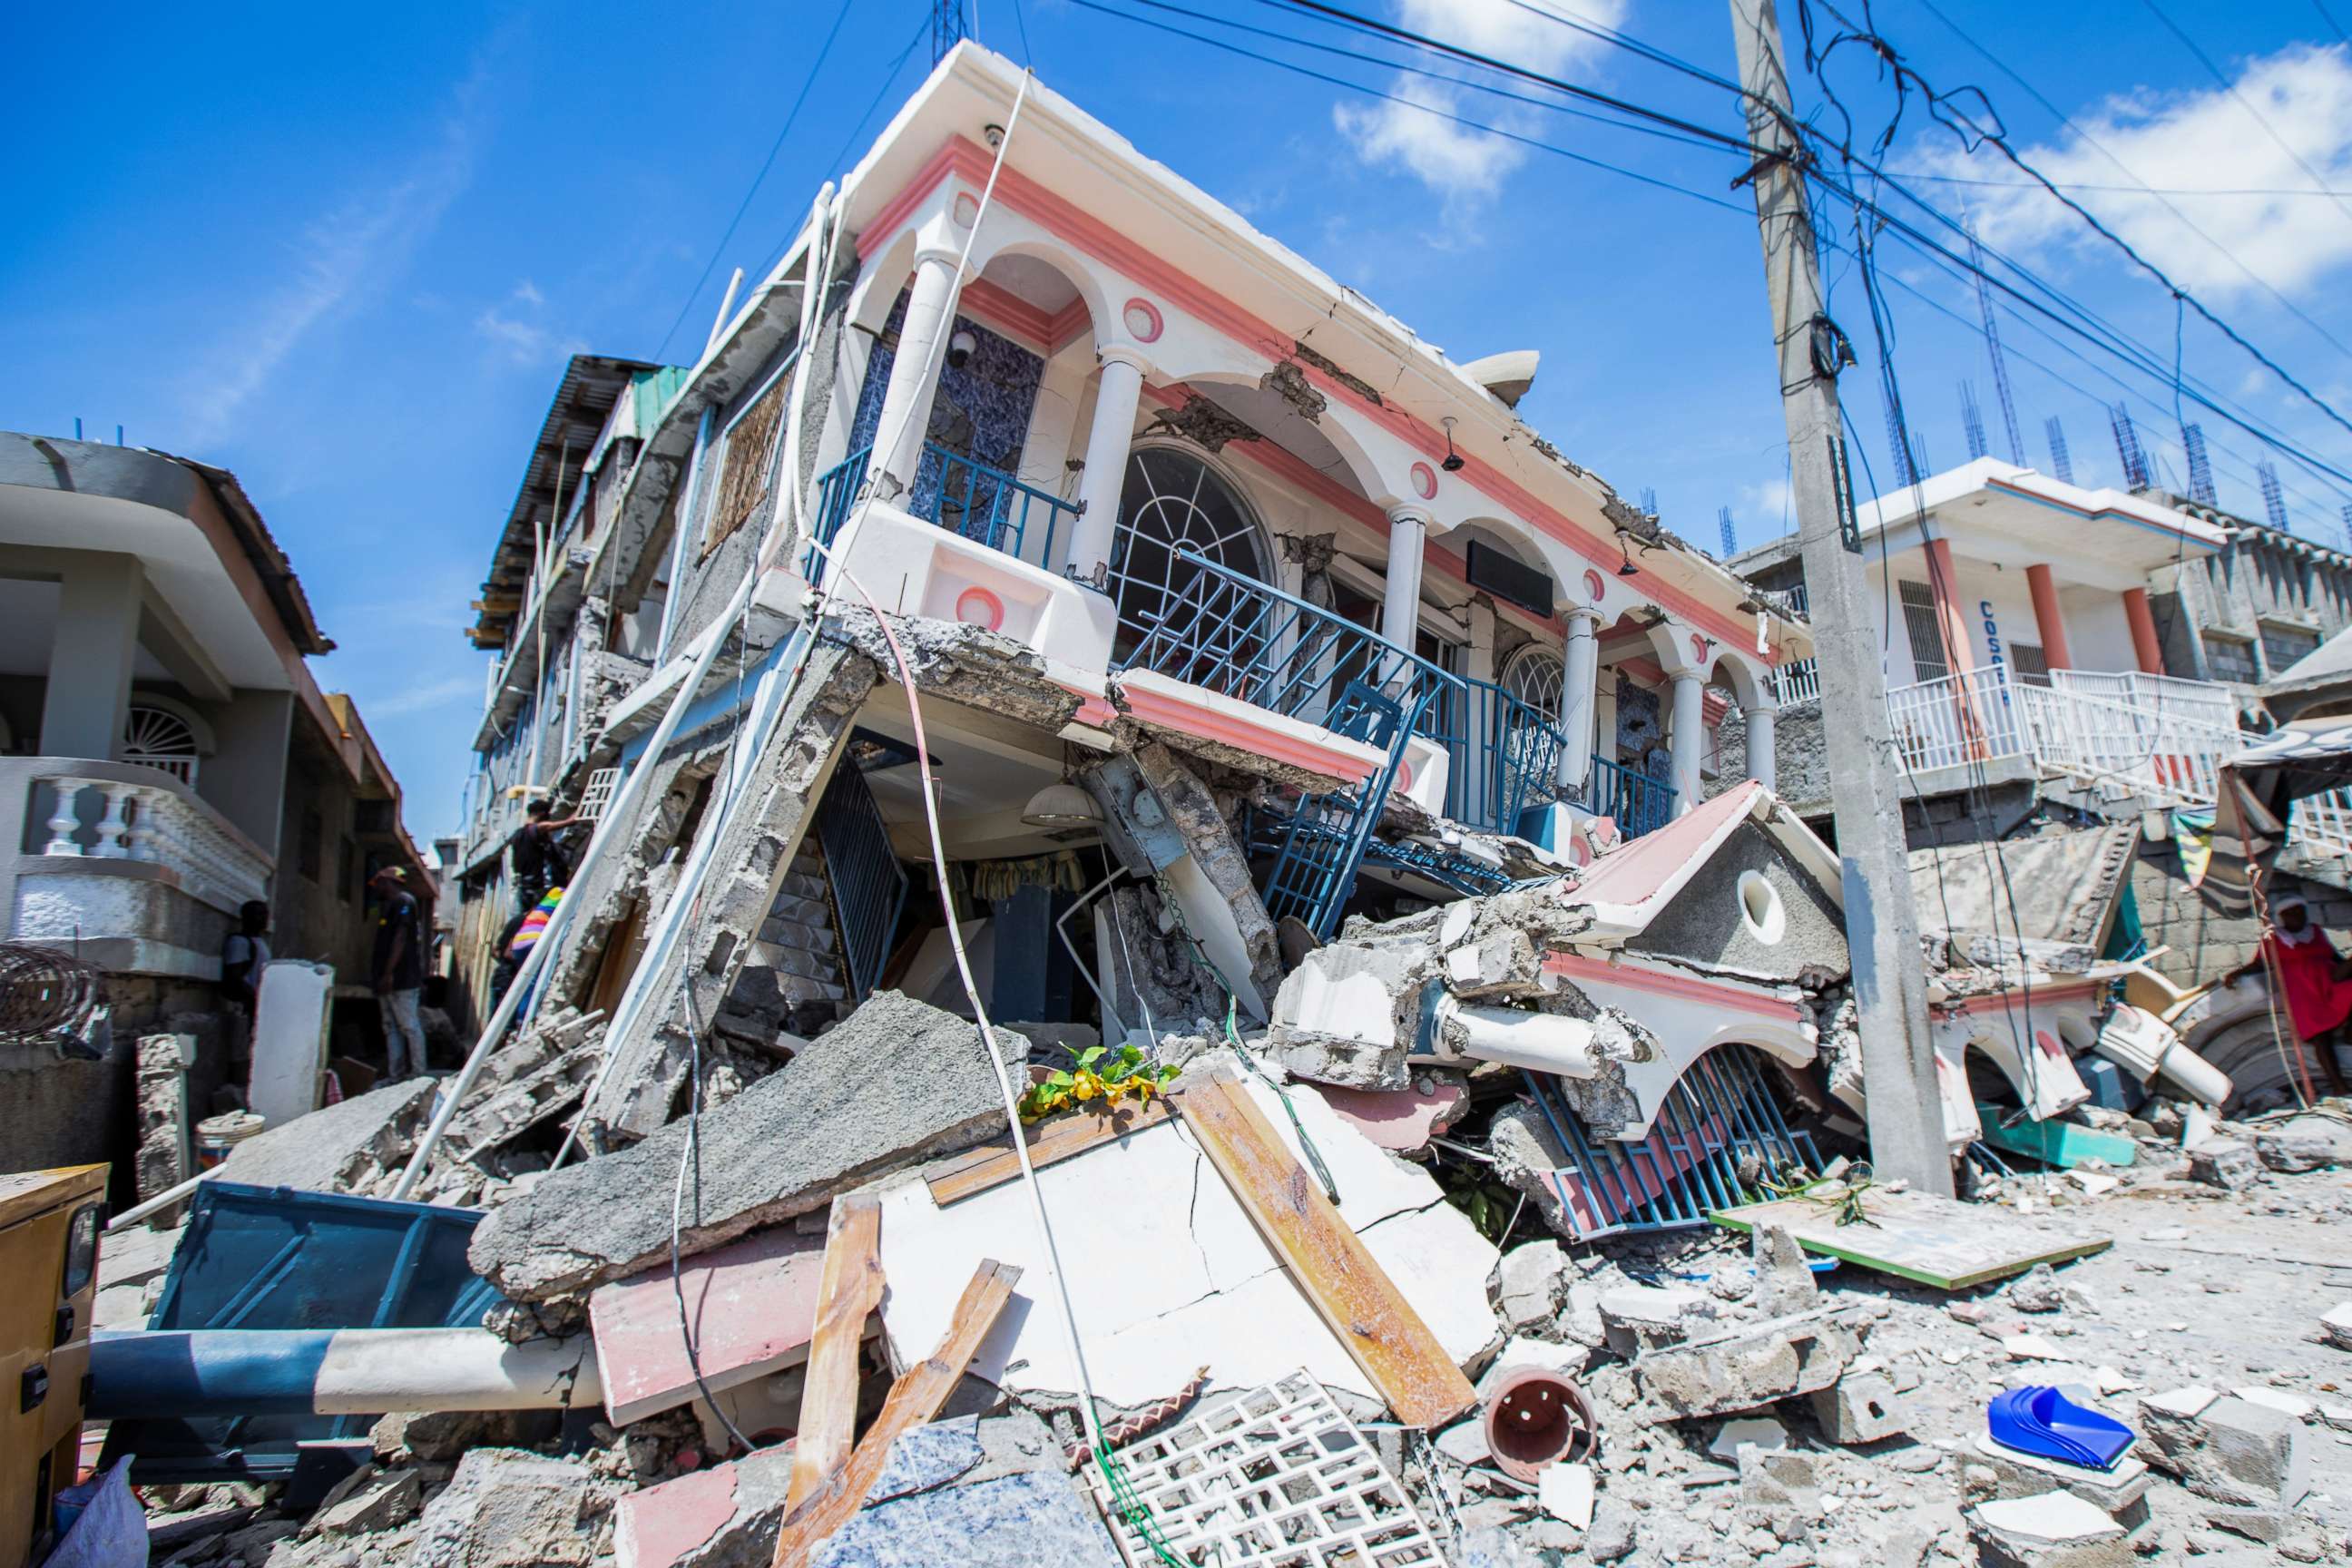 PHOTO: A view shows houses destroyed following a 7.2 magnitude earthquake in Les Cayes, Haiti, Aug. 14, 2021.